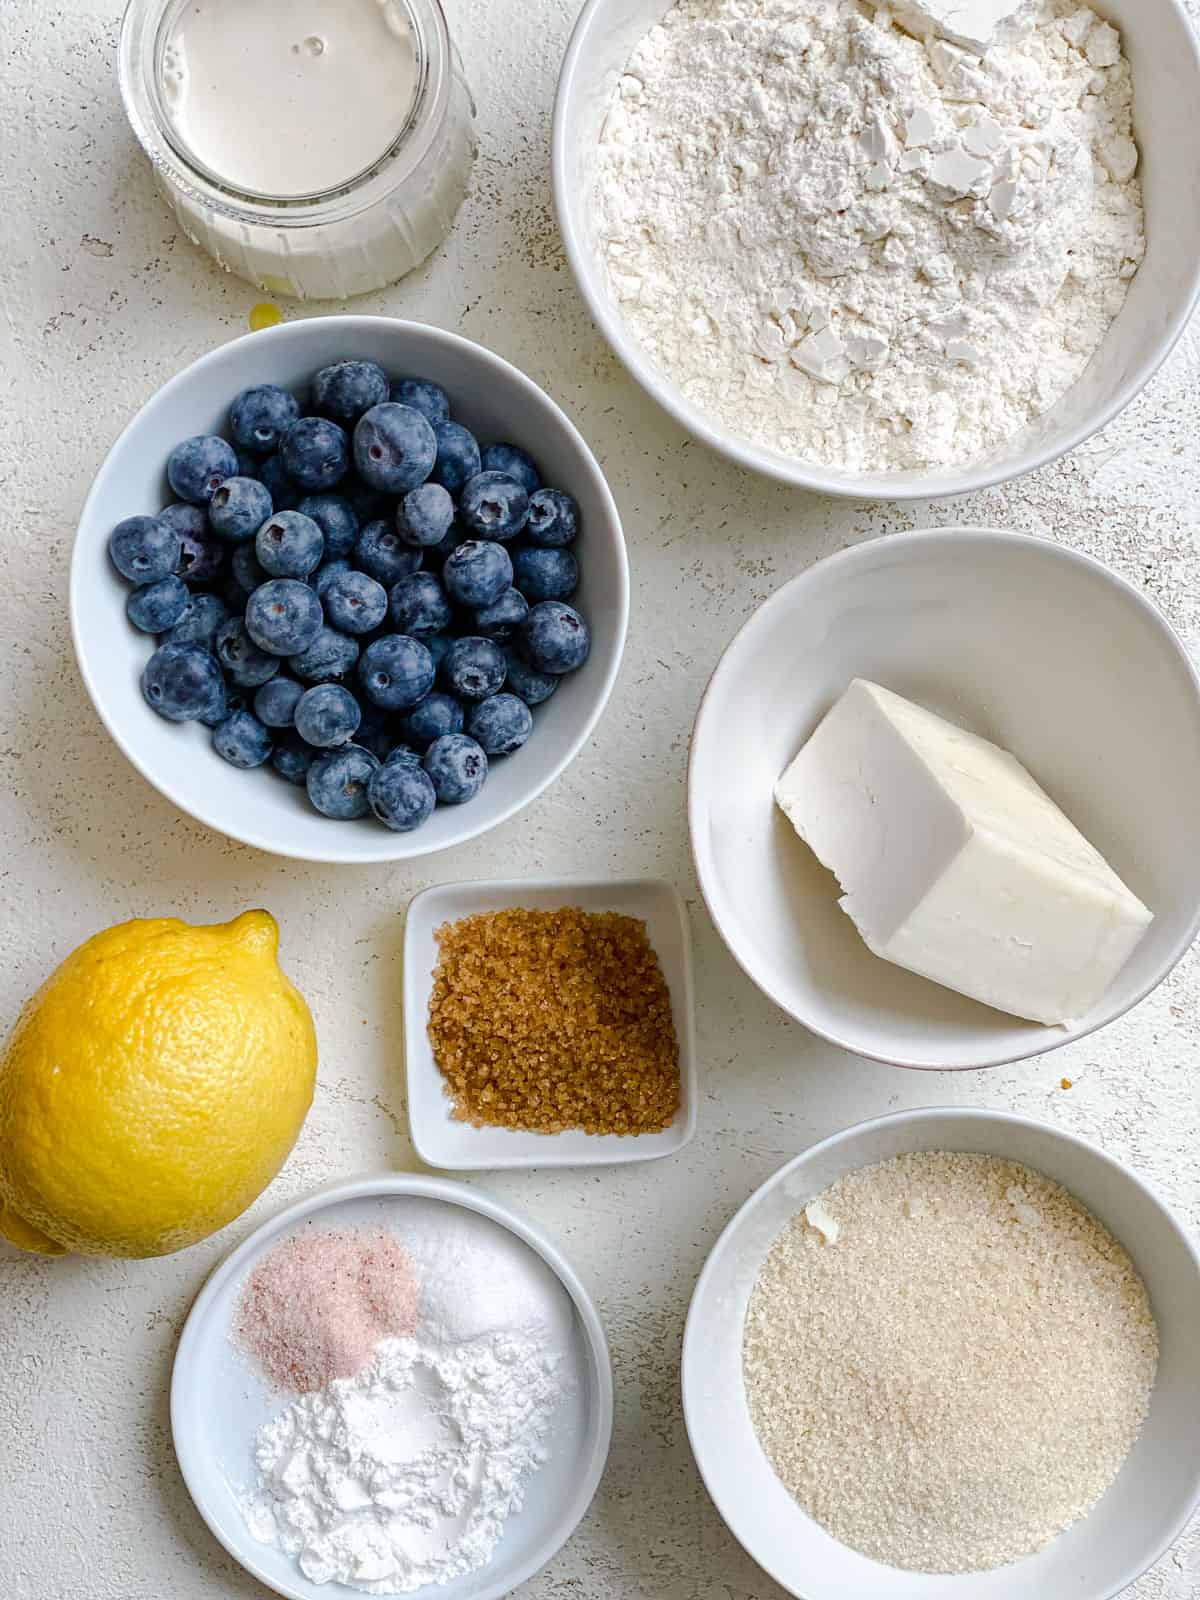 ingredients for Vegan Lemon Blueberry Scones measured out against a white surface